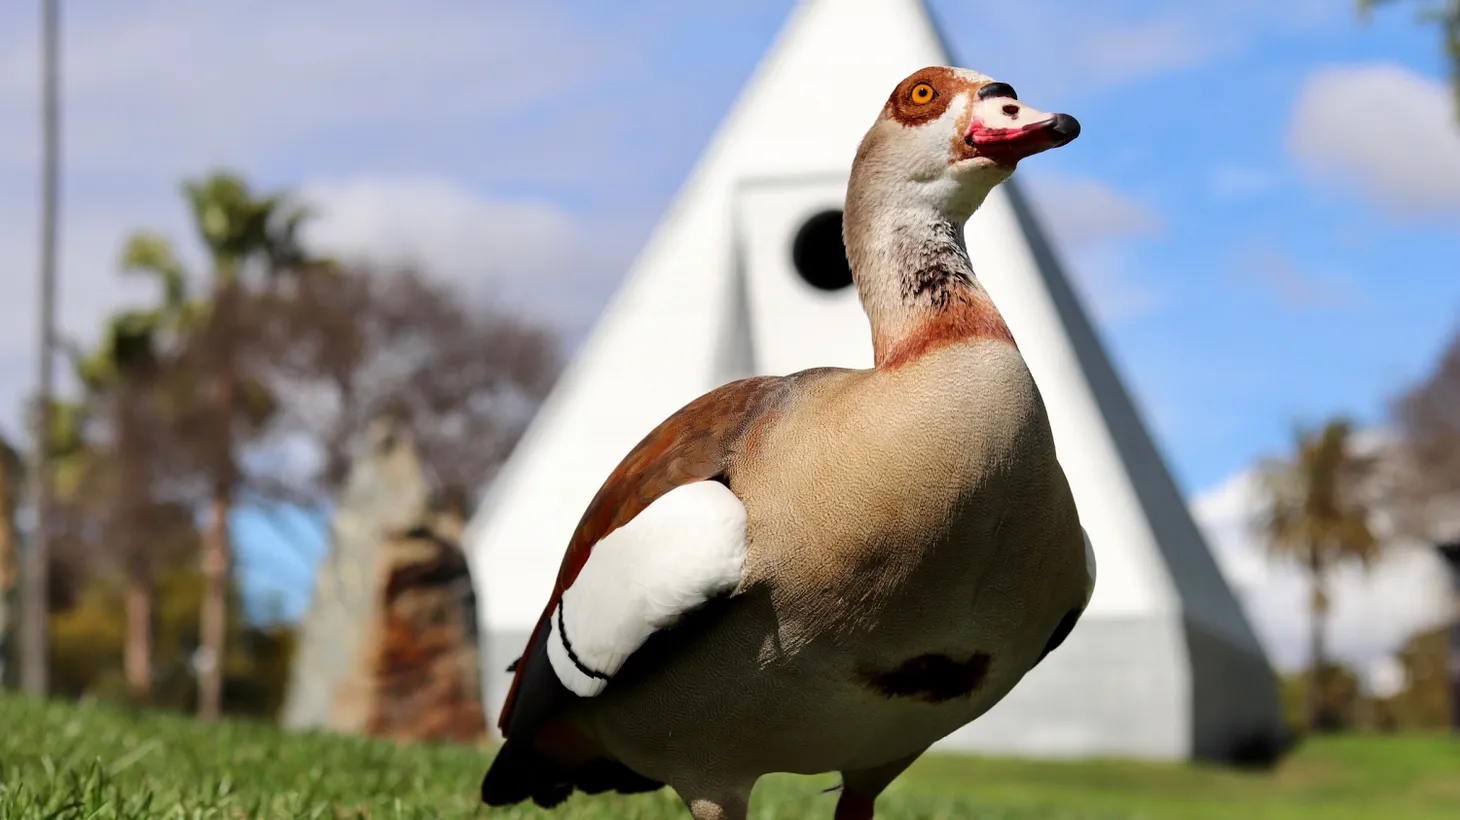 Egyptian geese migrate annually to Hollywood Forever Cemetery to enjoy the ponds.